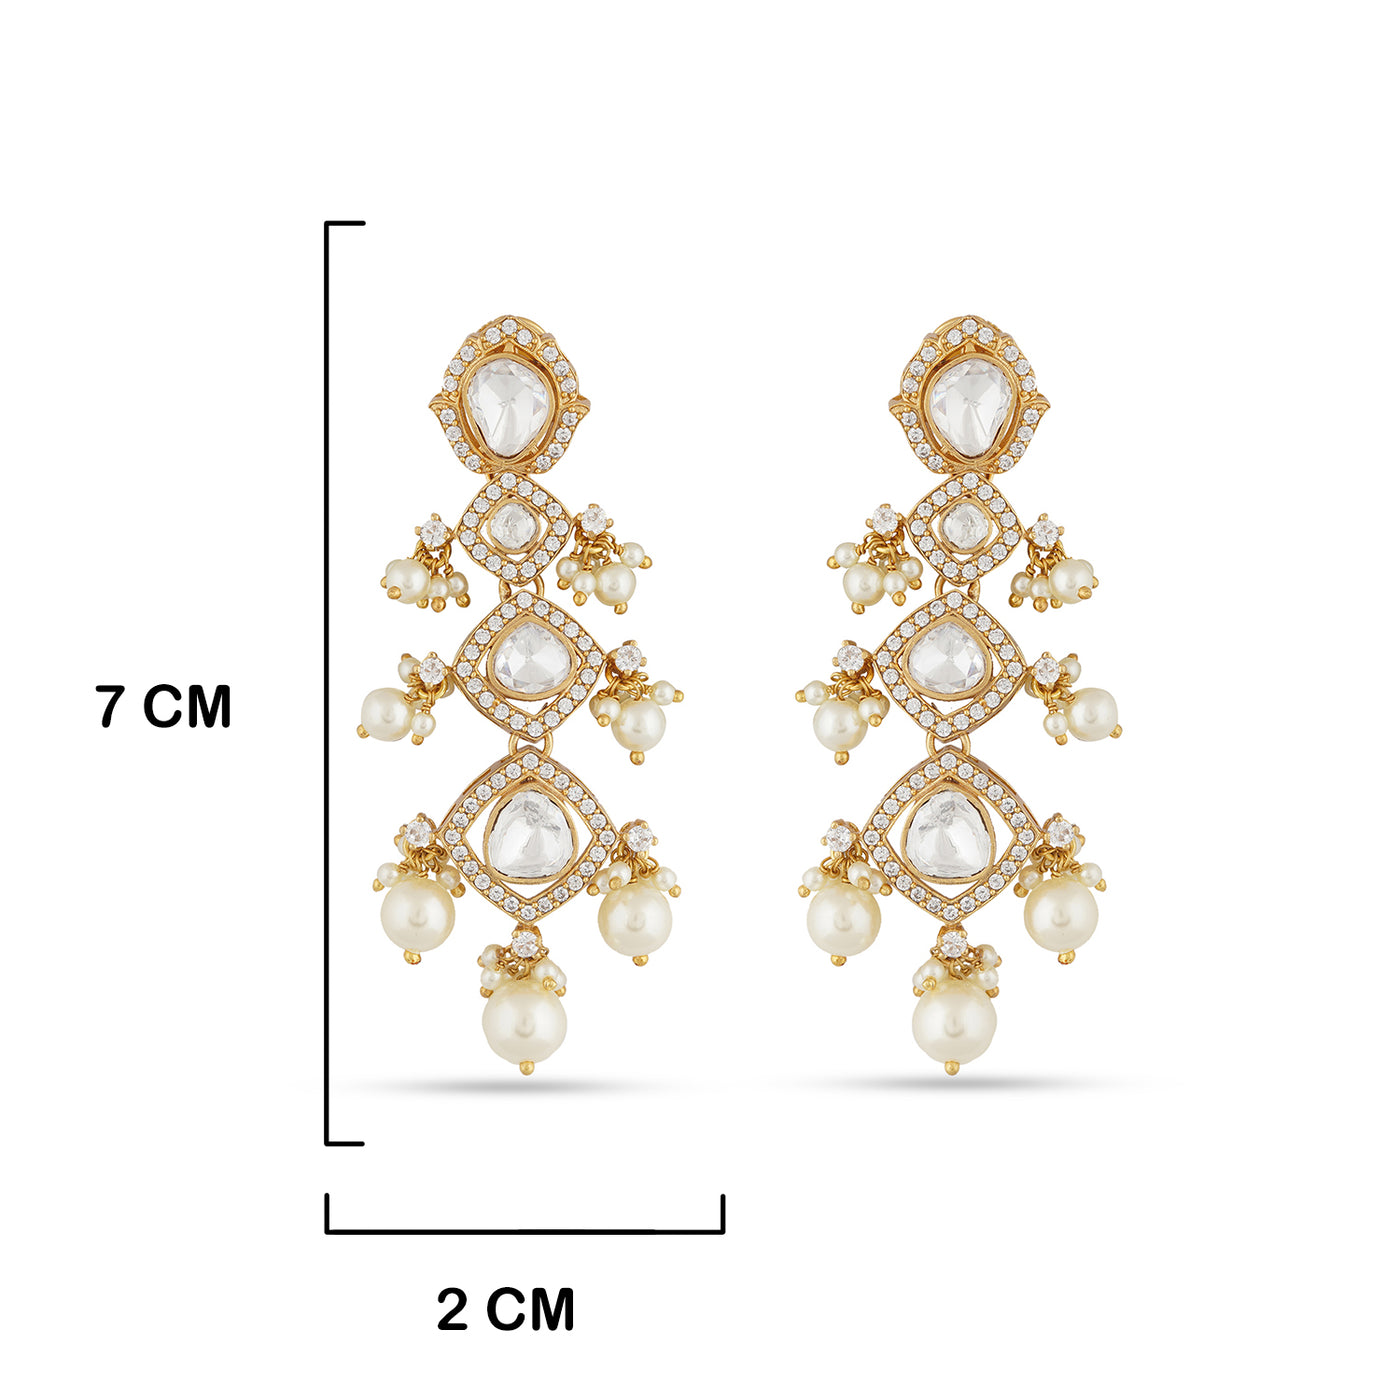 Polki and Pearl Dangle Earrings with measurements in cm. 7cm by 2cm